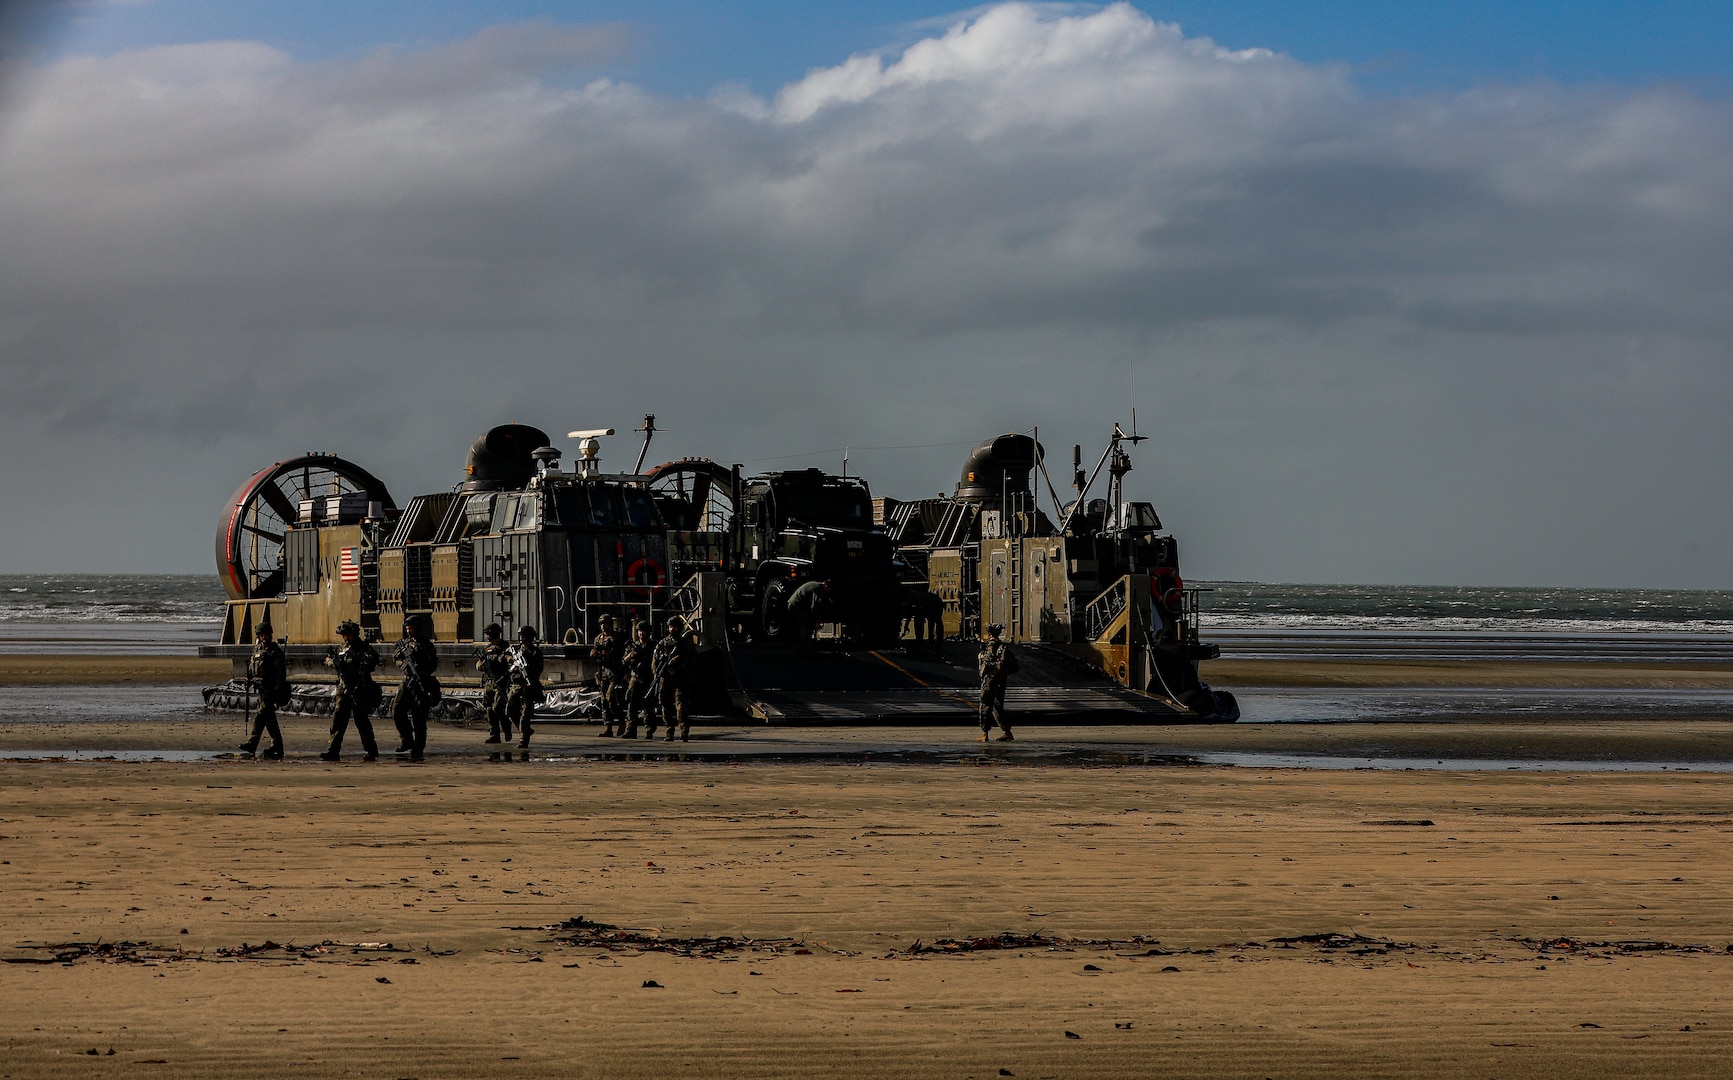 German Army soldiers offload after landing onshore via Landing Craft Air Cushion as part of Talisman Sabre 23 in Midge Point, Australia, July 25, 2023. Amphibious operations provide a combined-joint force commander the capability to rapidly project power ashore to support crisis response at the desired time and location. (U.S. Army Photo by Staff Sgt. Jessica Elbouab)